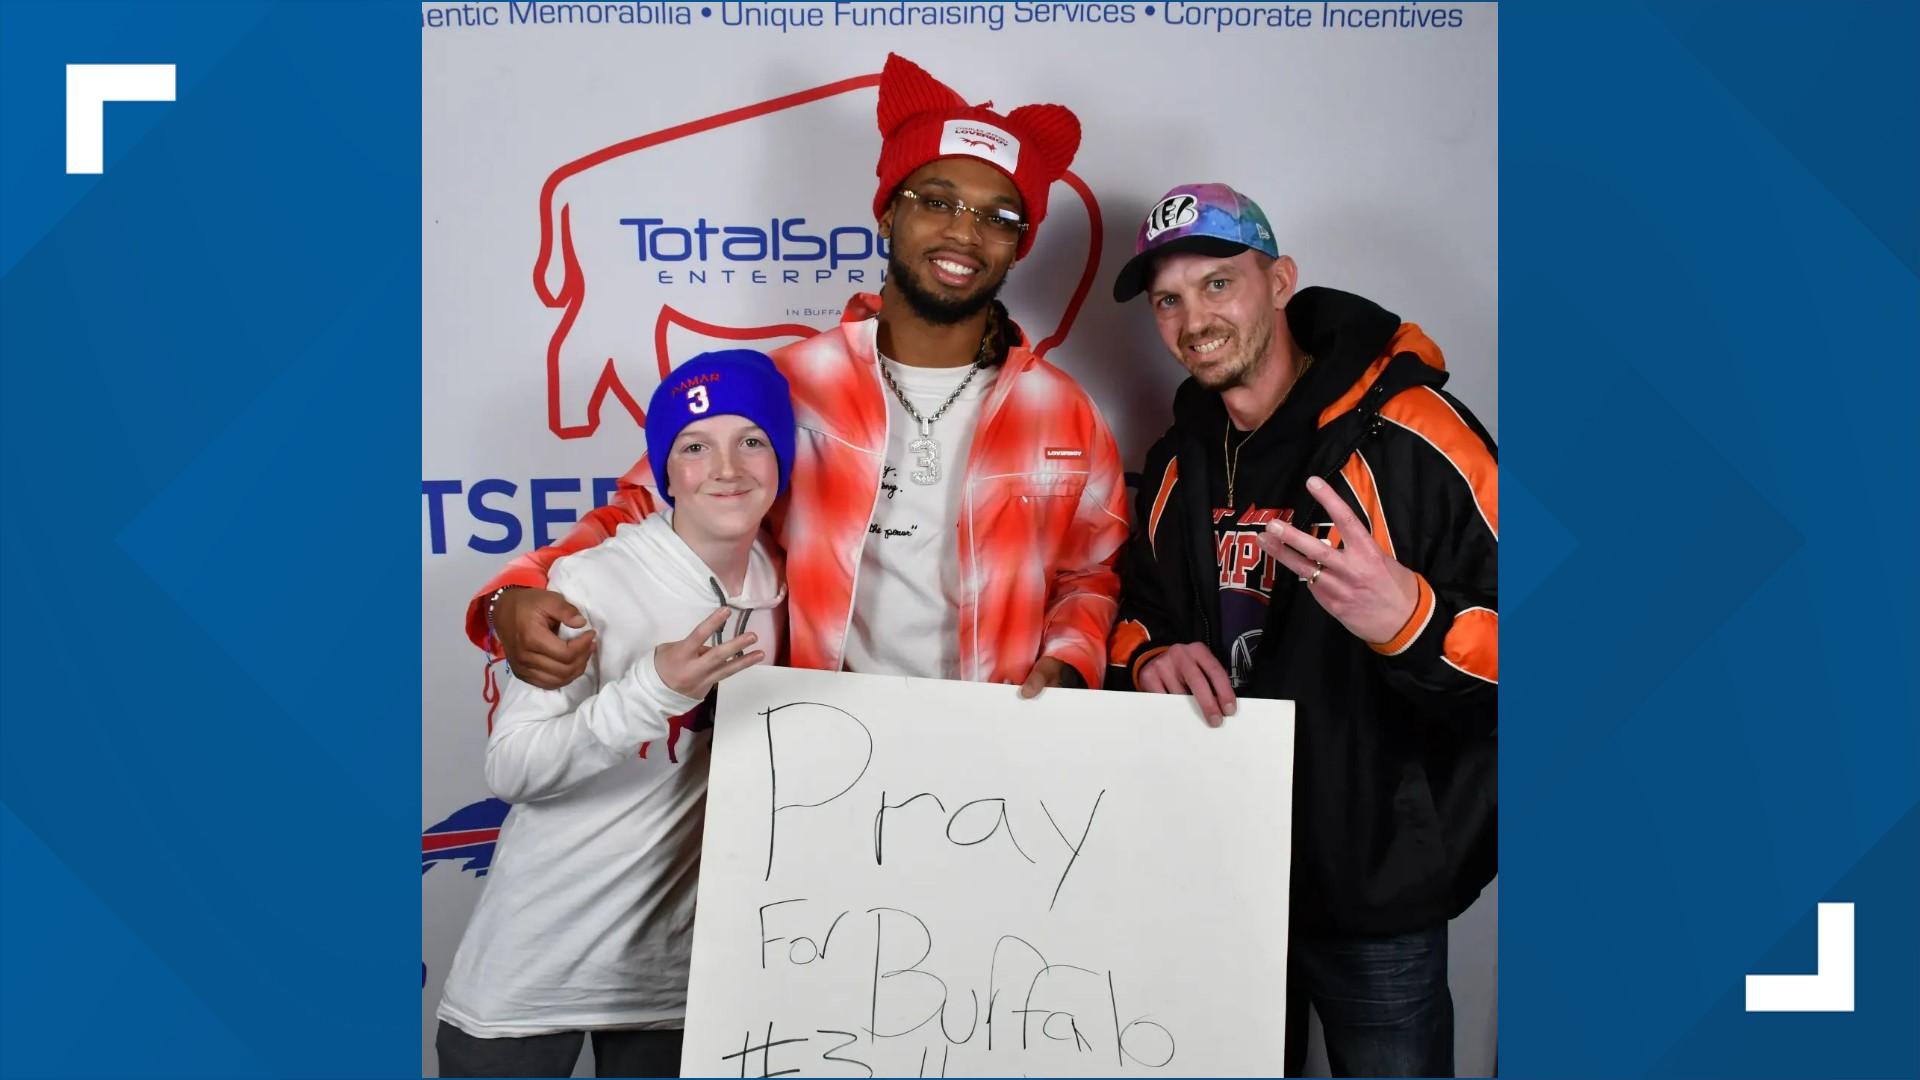 Three months after Josh Collins created an impromptu sign urging people to pray for Damar Hamlin, he got to meet the Buffalo Bills' safety.